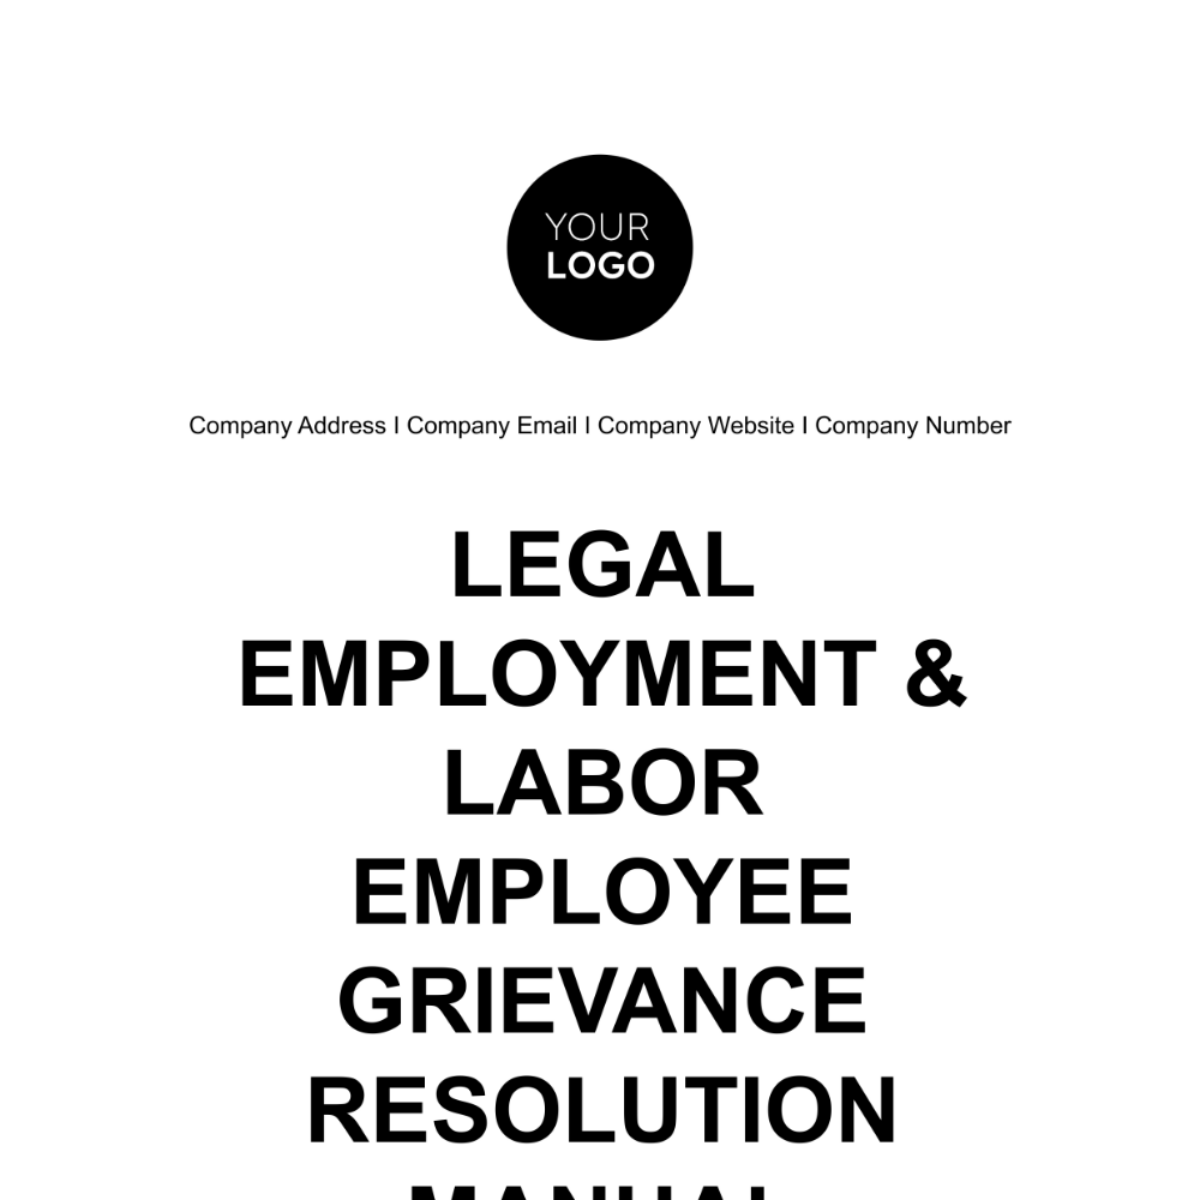 Free Legal Employment & Labor Employee Grievance Resolution Manual Template